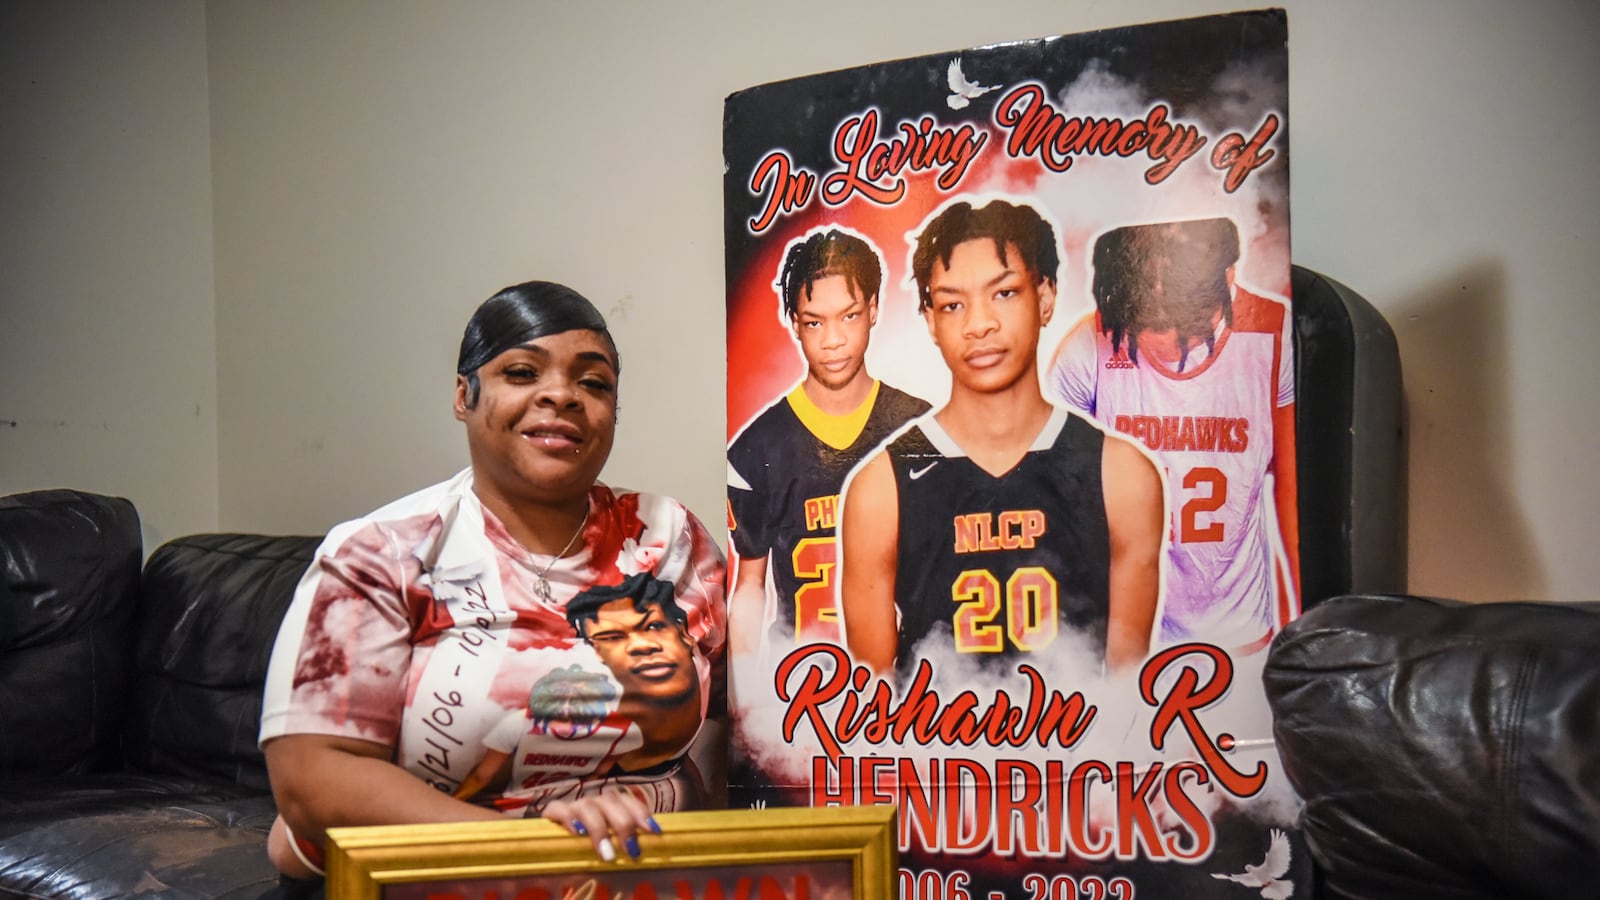 A mother holds a photo and a poster of her late son. The poster says, "In loving memory of Rishawn R. Hendricks."